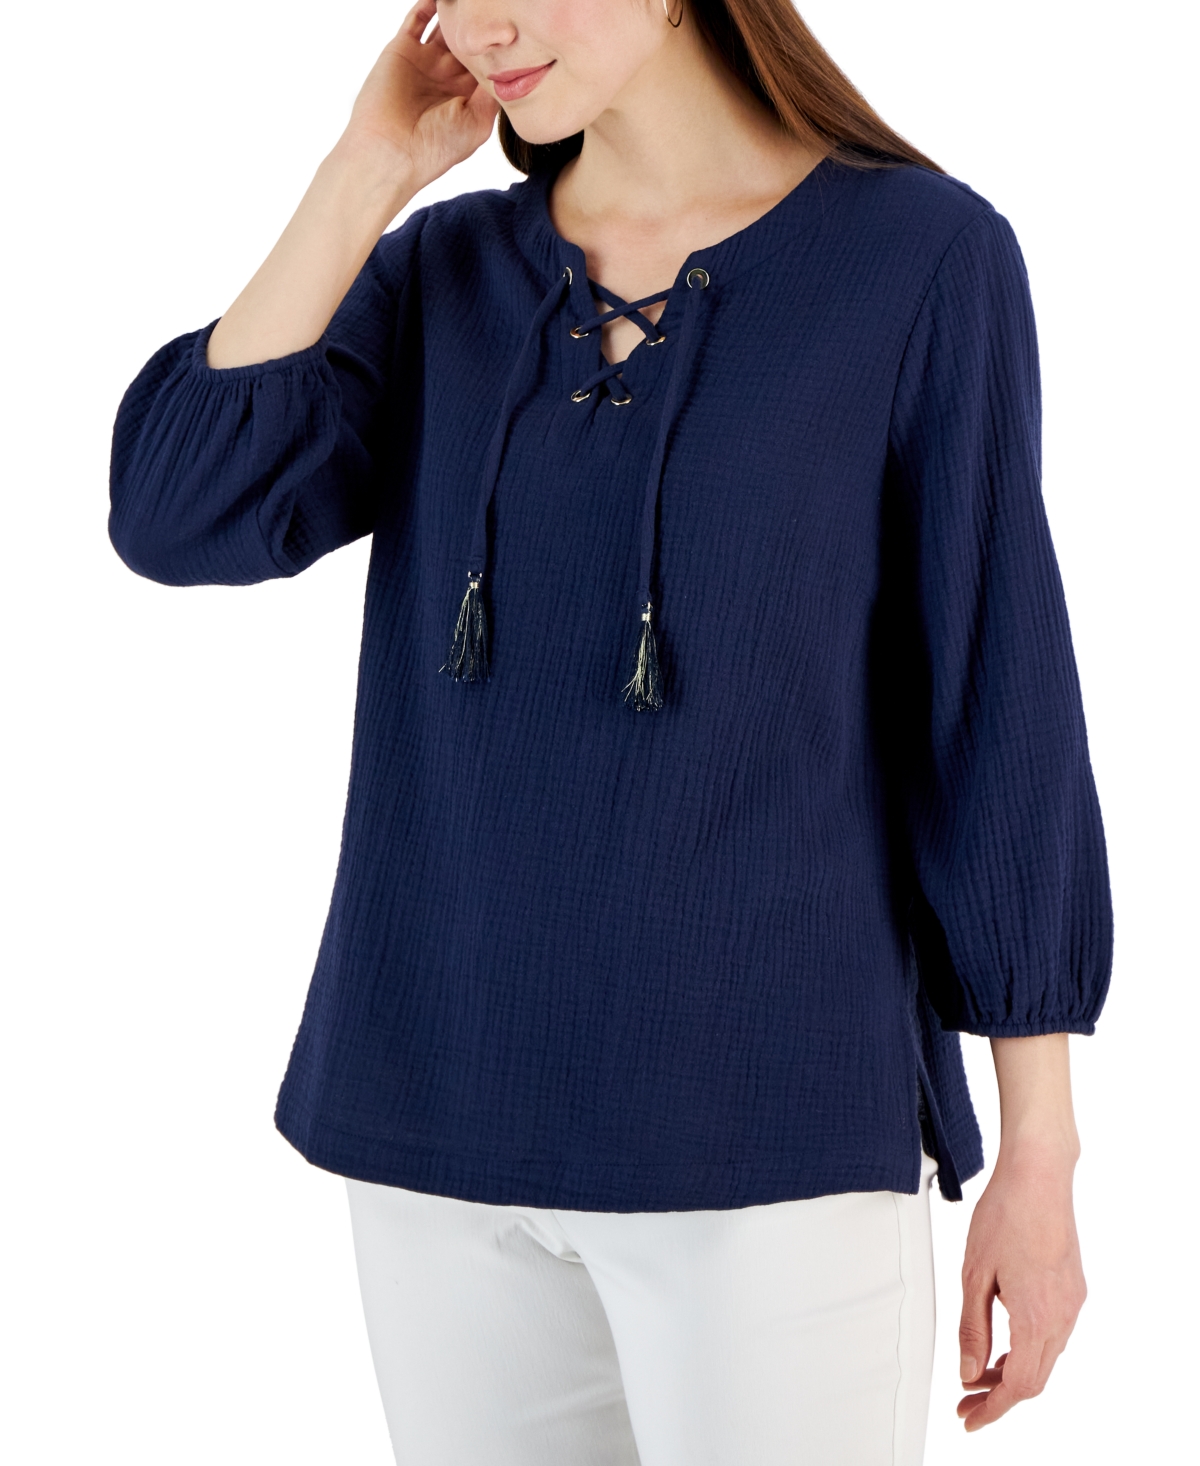 Women's Cotton Gauze Tasseled Lace-Up Top, Created for Macy's - Intrepid Blue